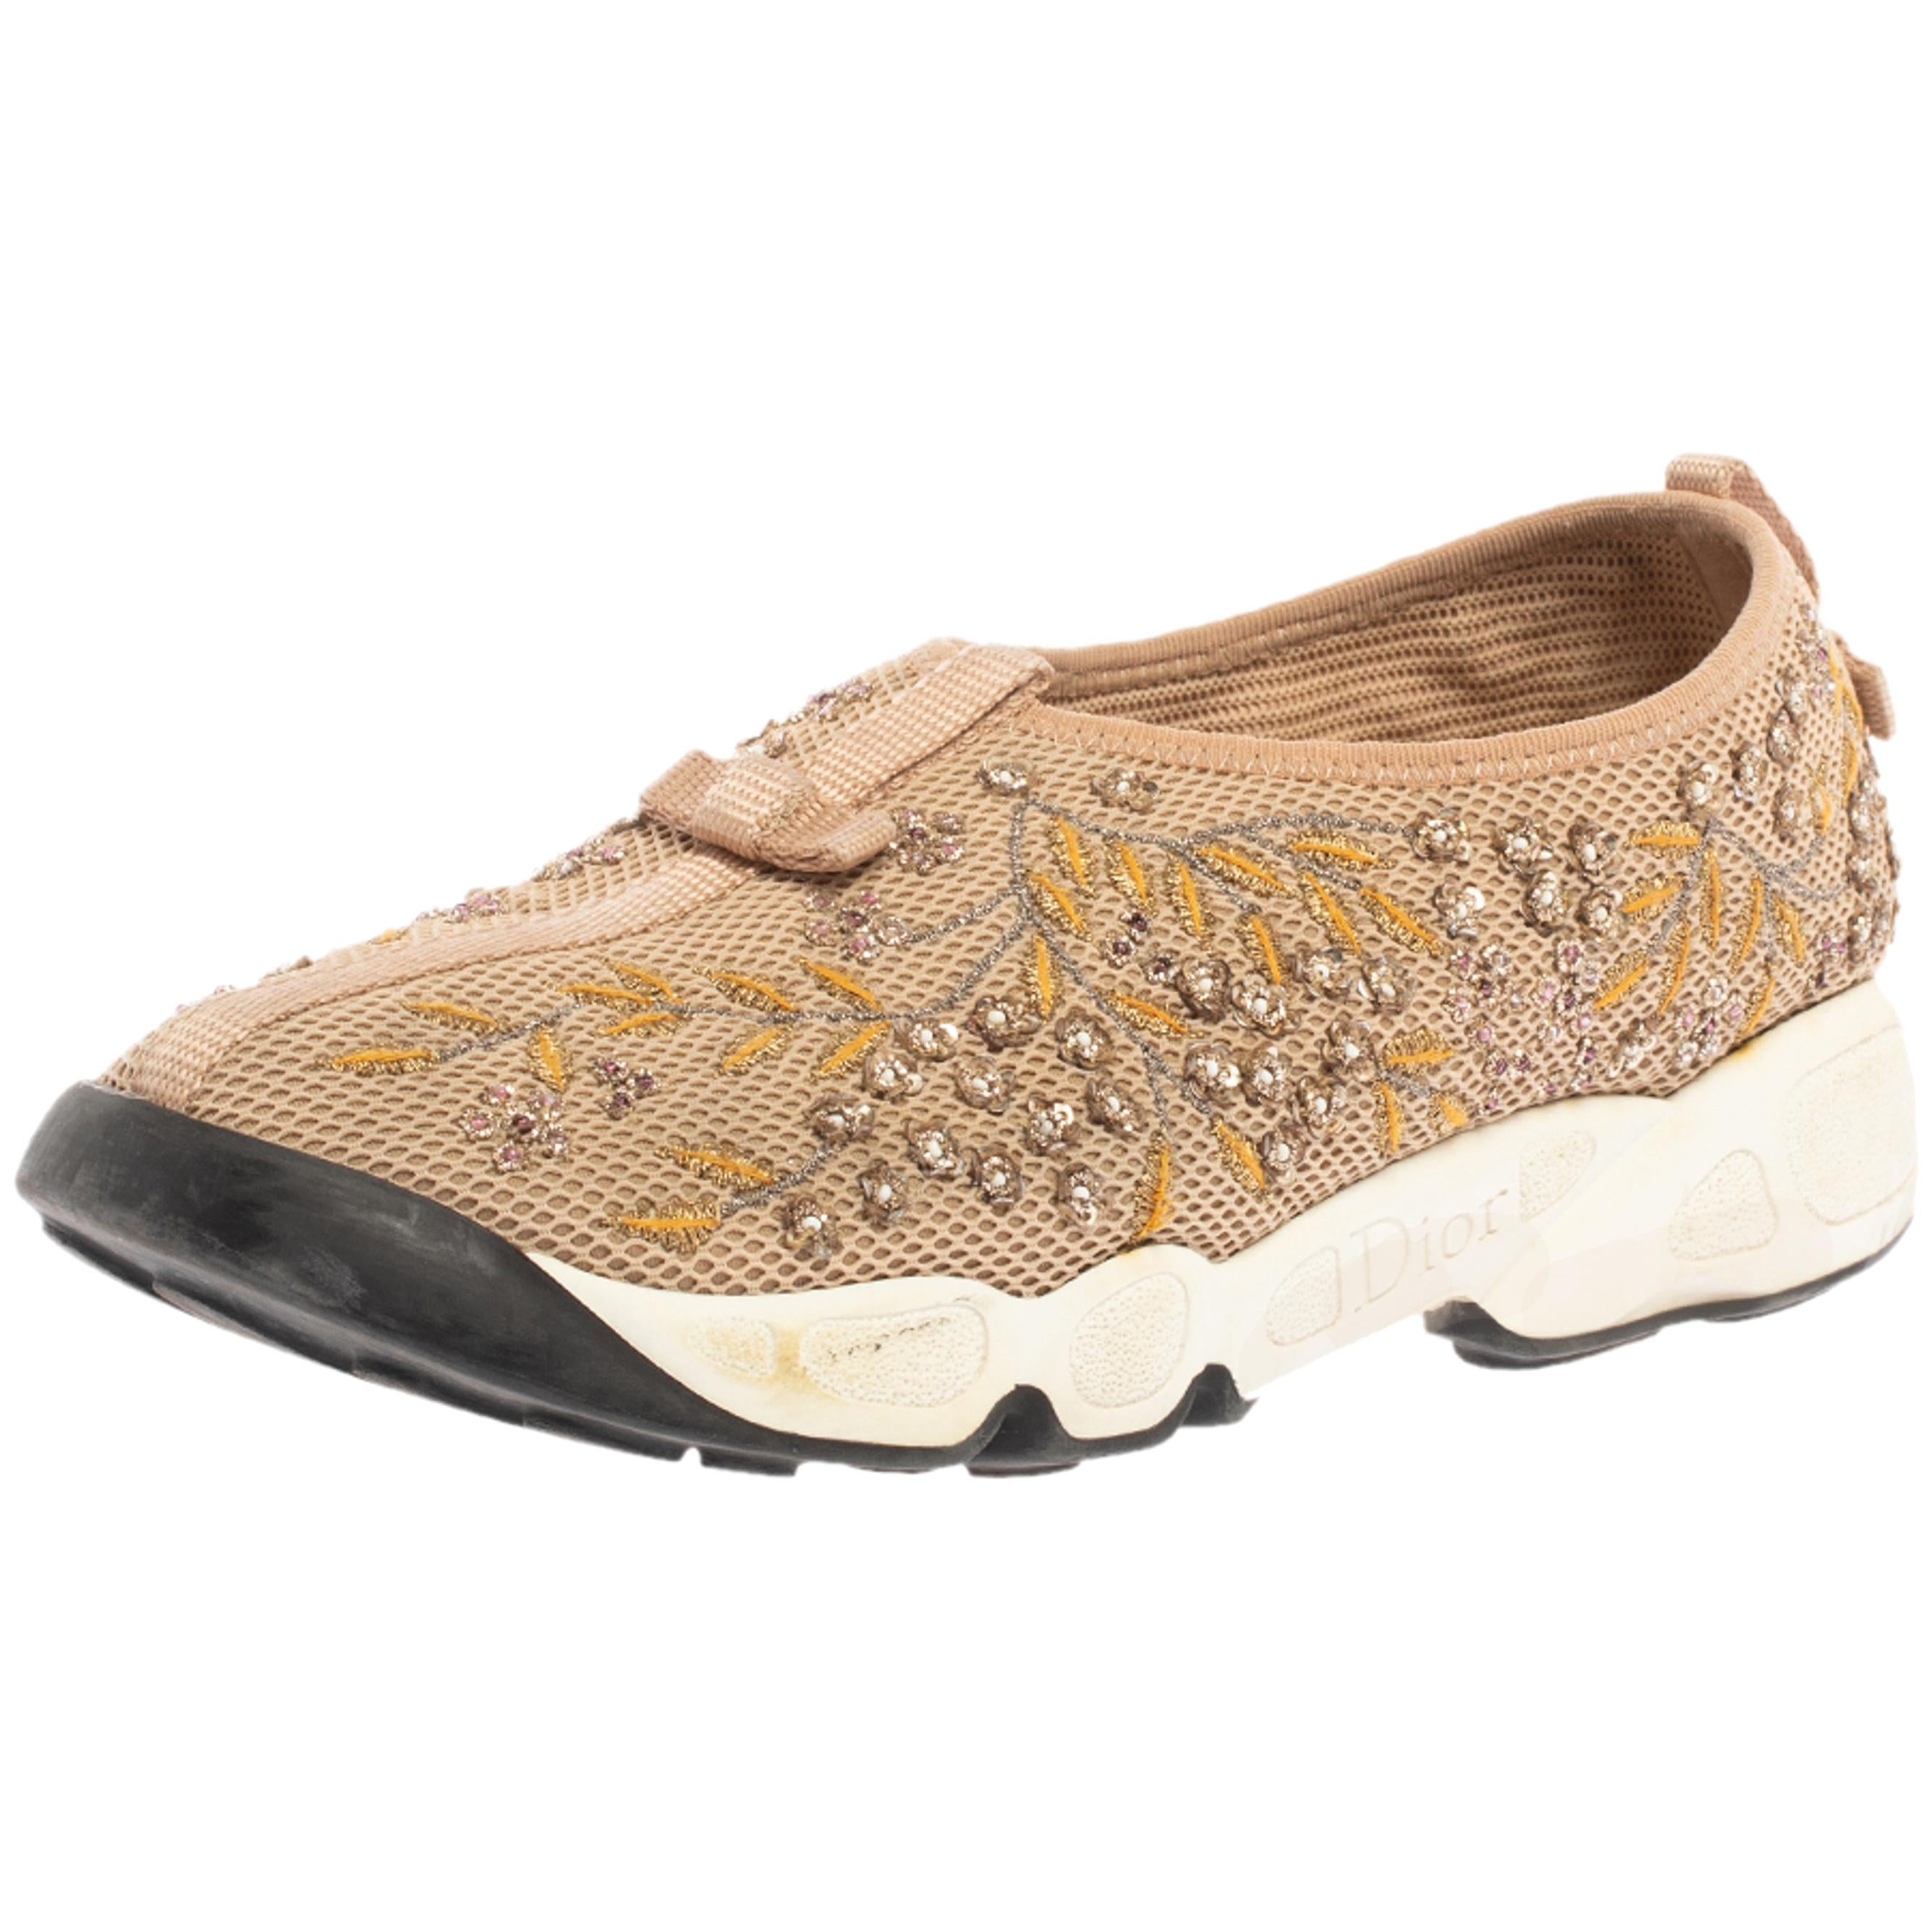 Dior Beige Mesh Fusion Floral Embellished And Embroidered Sneakers Size 38.5